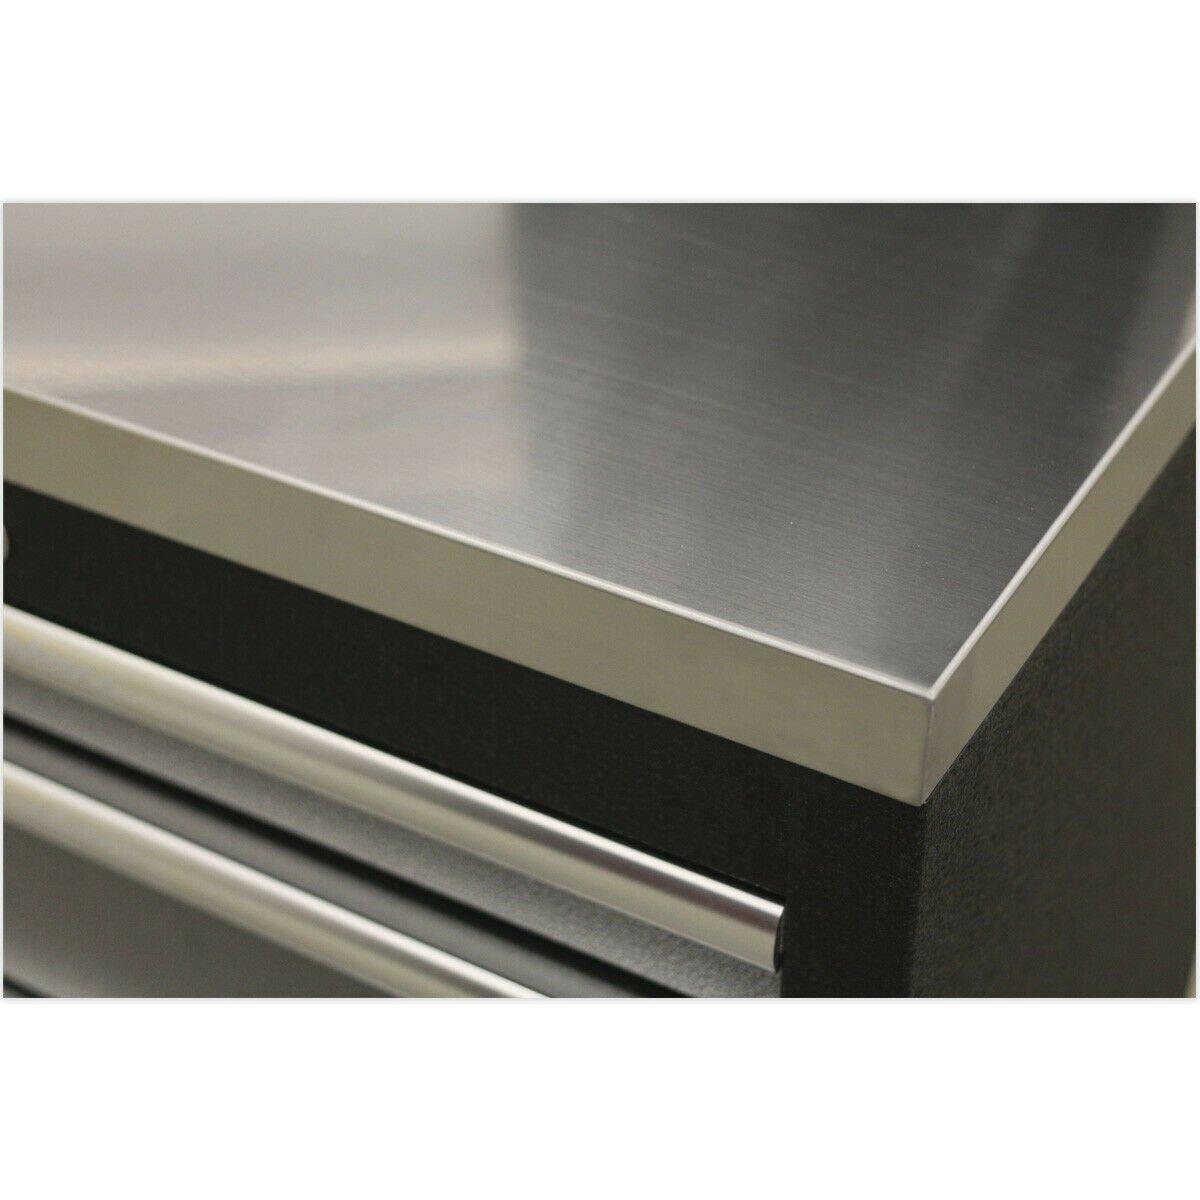 680mm Stainless Steel Worktop for ys02633 ys02634 ys02639 & ys02641 Cabinets